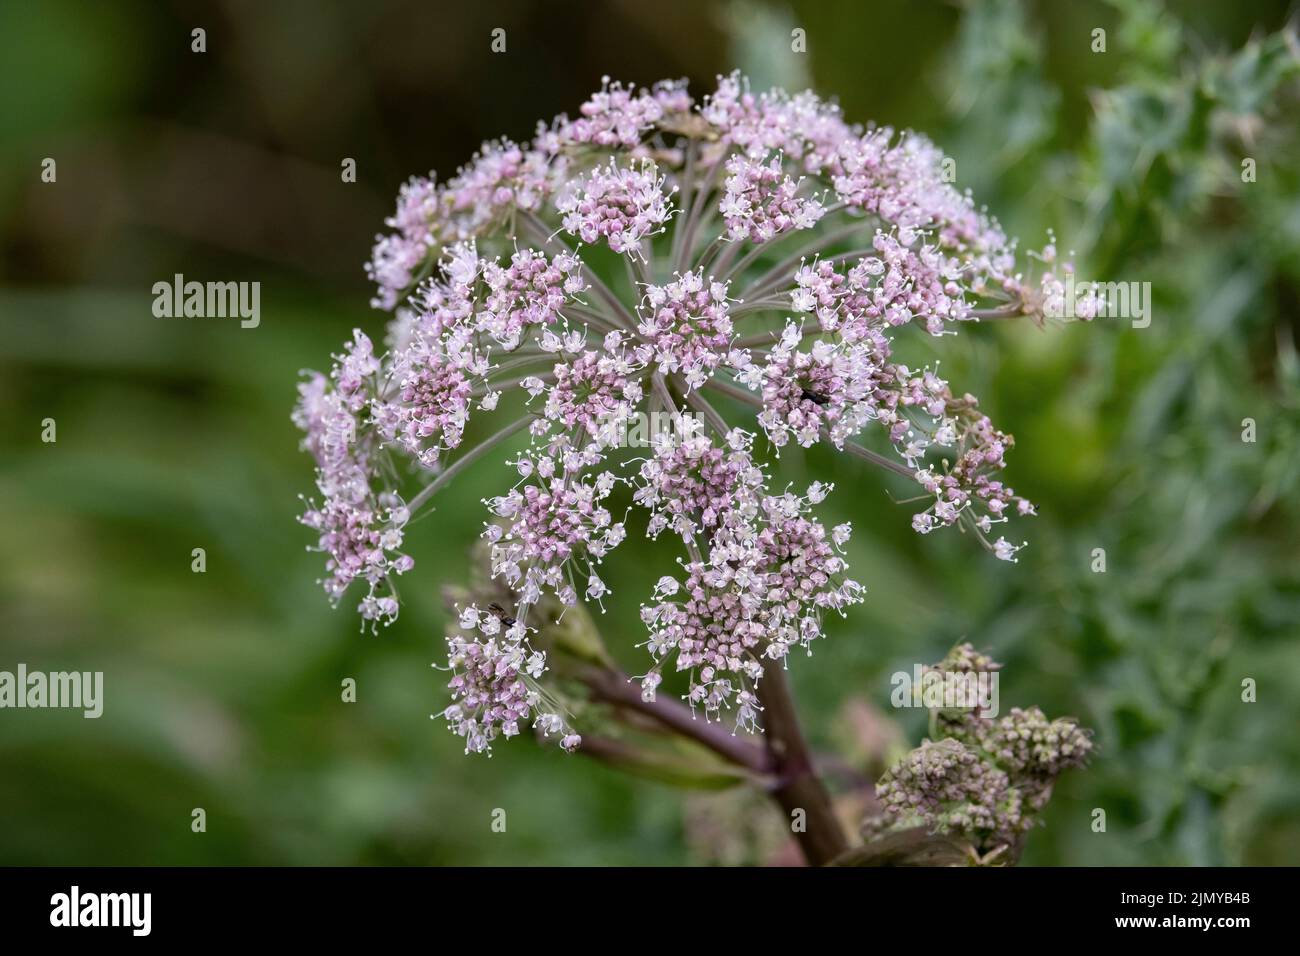 A flowering head of the Wild Angelica plant, Warwickshire, England. Stock Photo